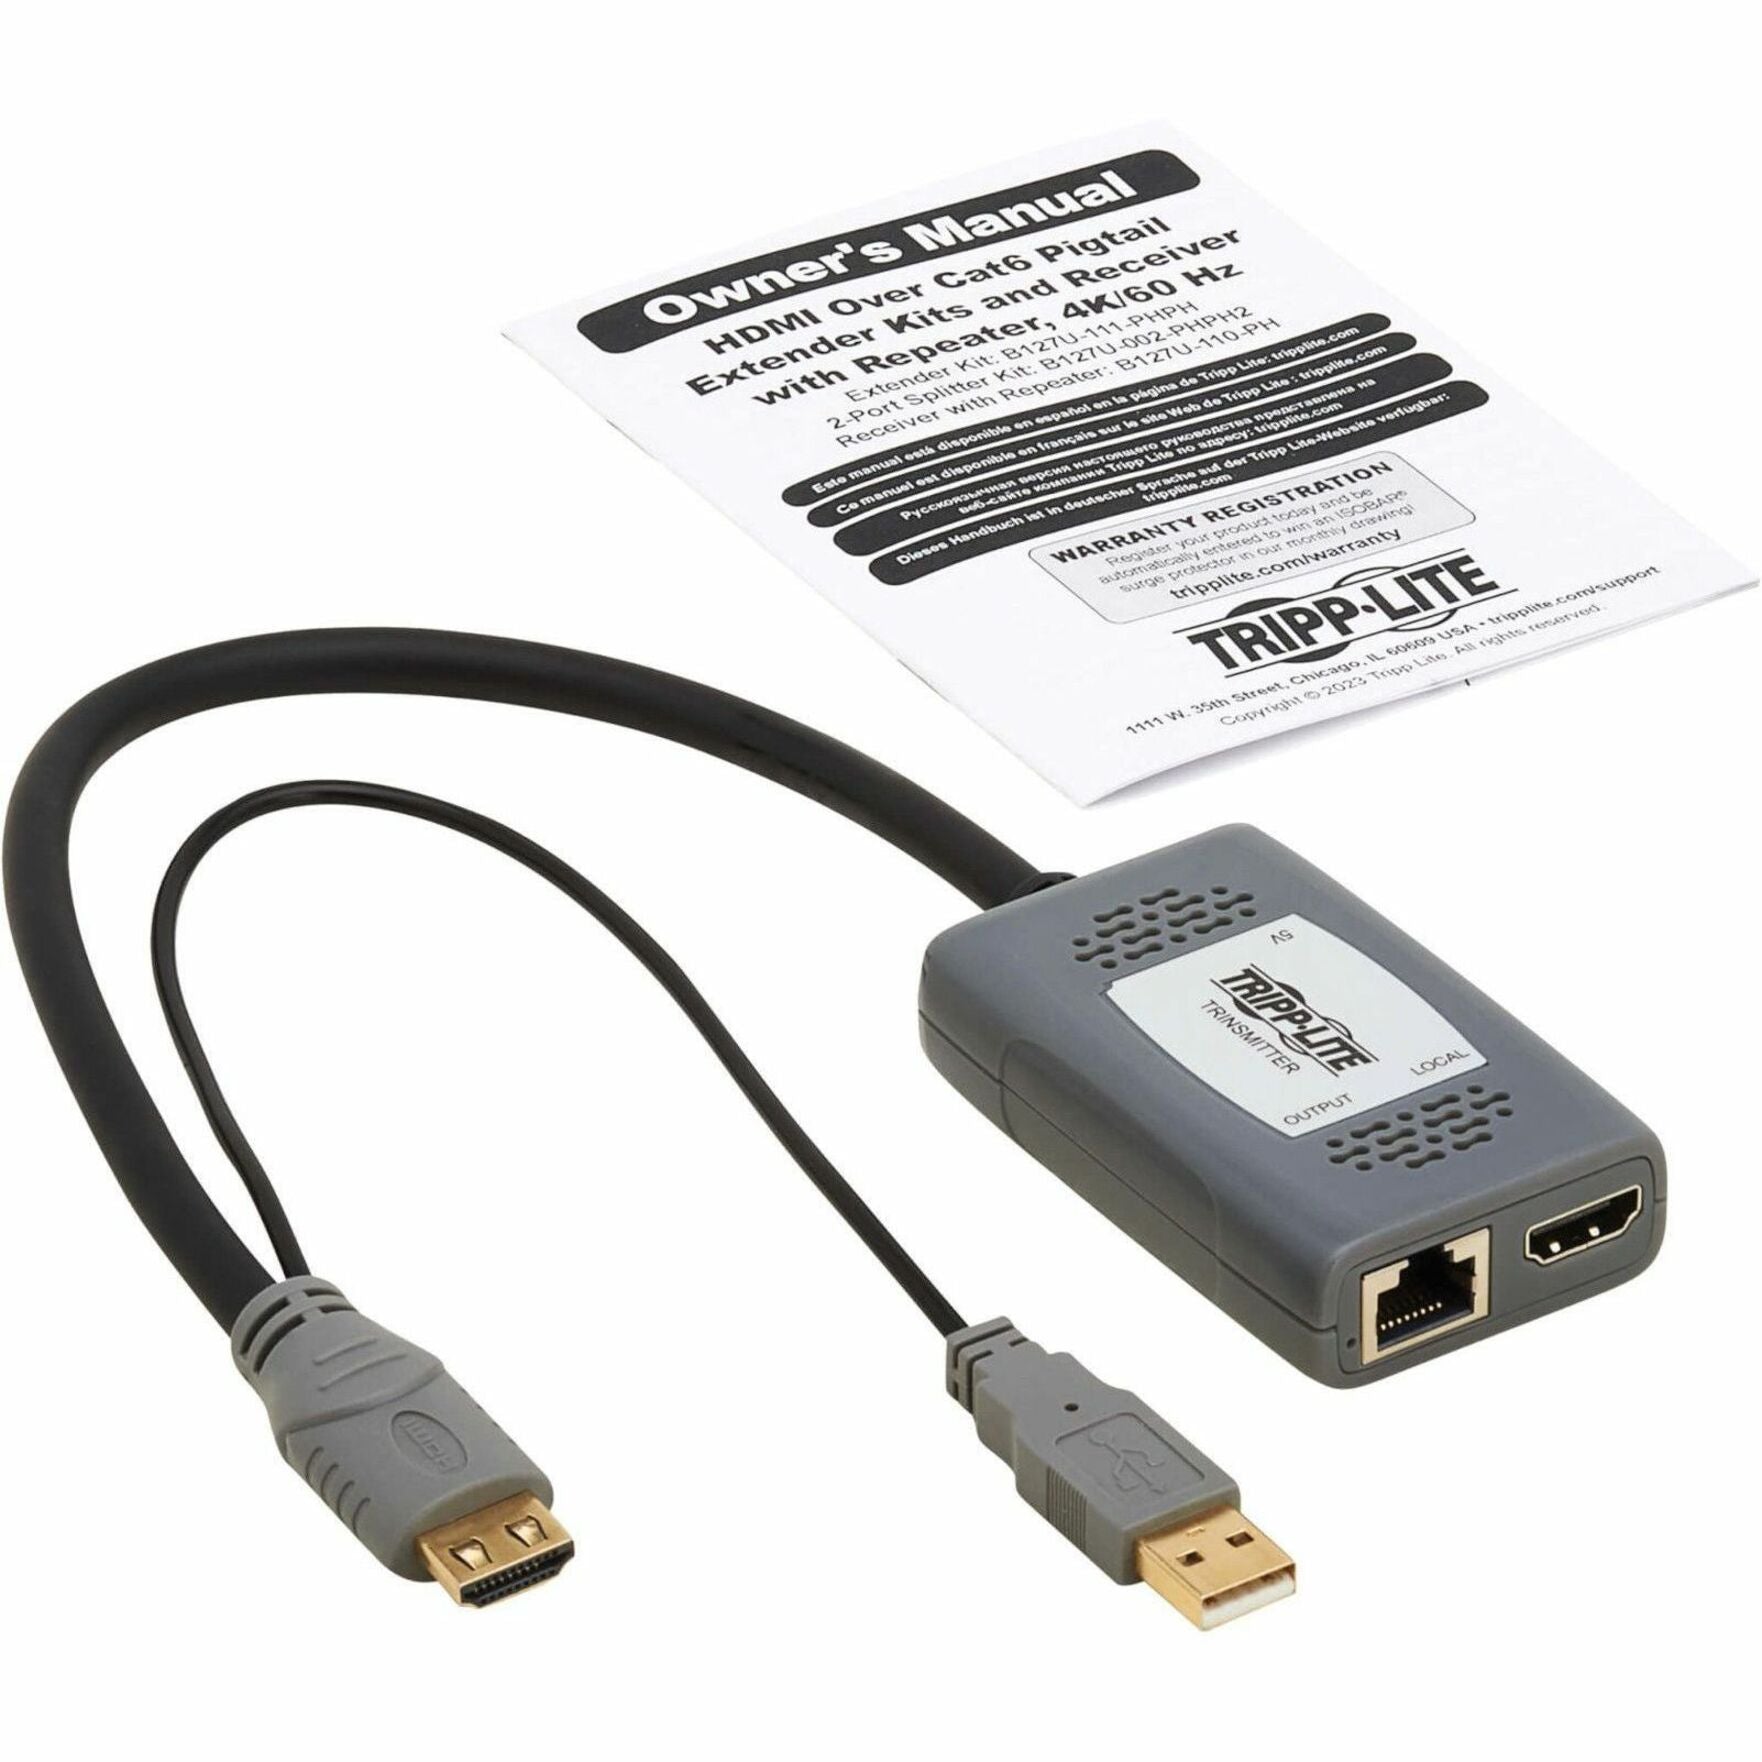 Tripp Lite B127U-110-PH Video Extender Receiver, 4K, 1 Year Warranty, TAA Compliant, USB, HDMI Out, Network (RJ-45), Digital Signage System, Twisted Pair, Category 6